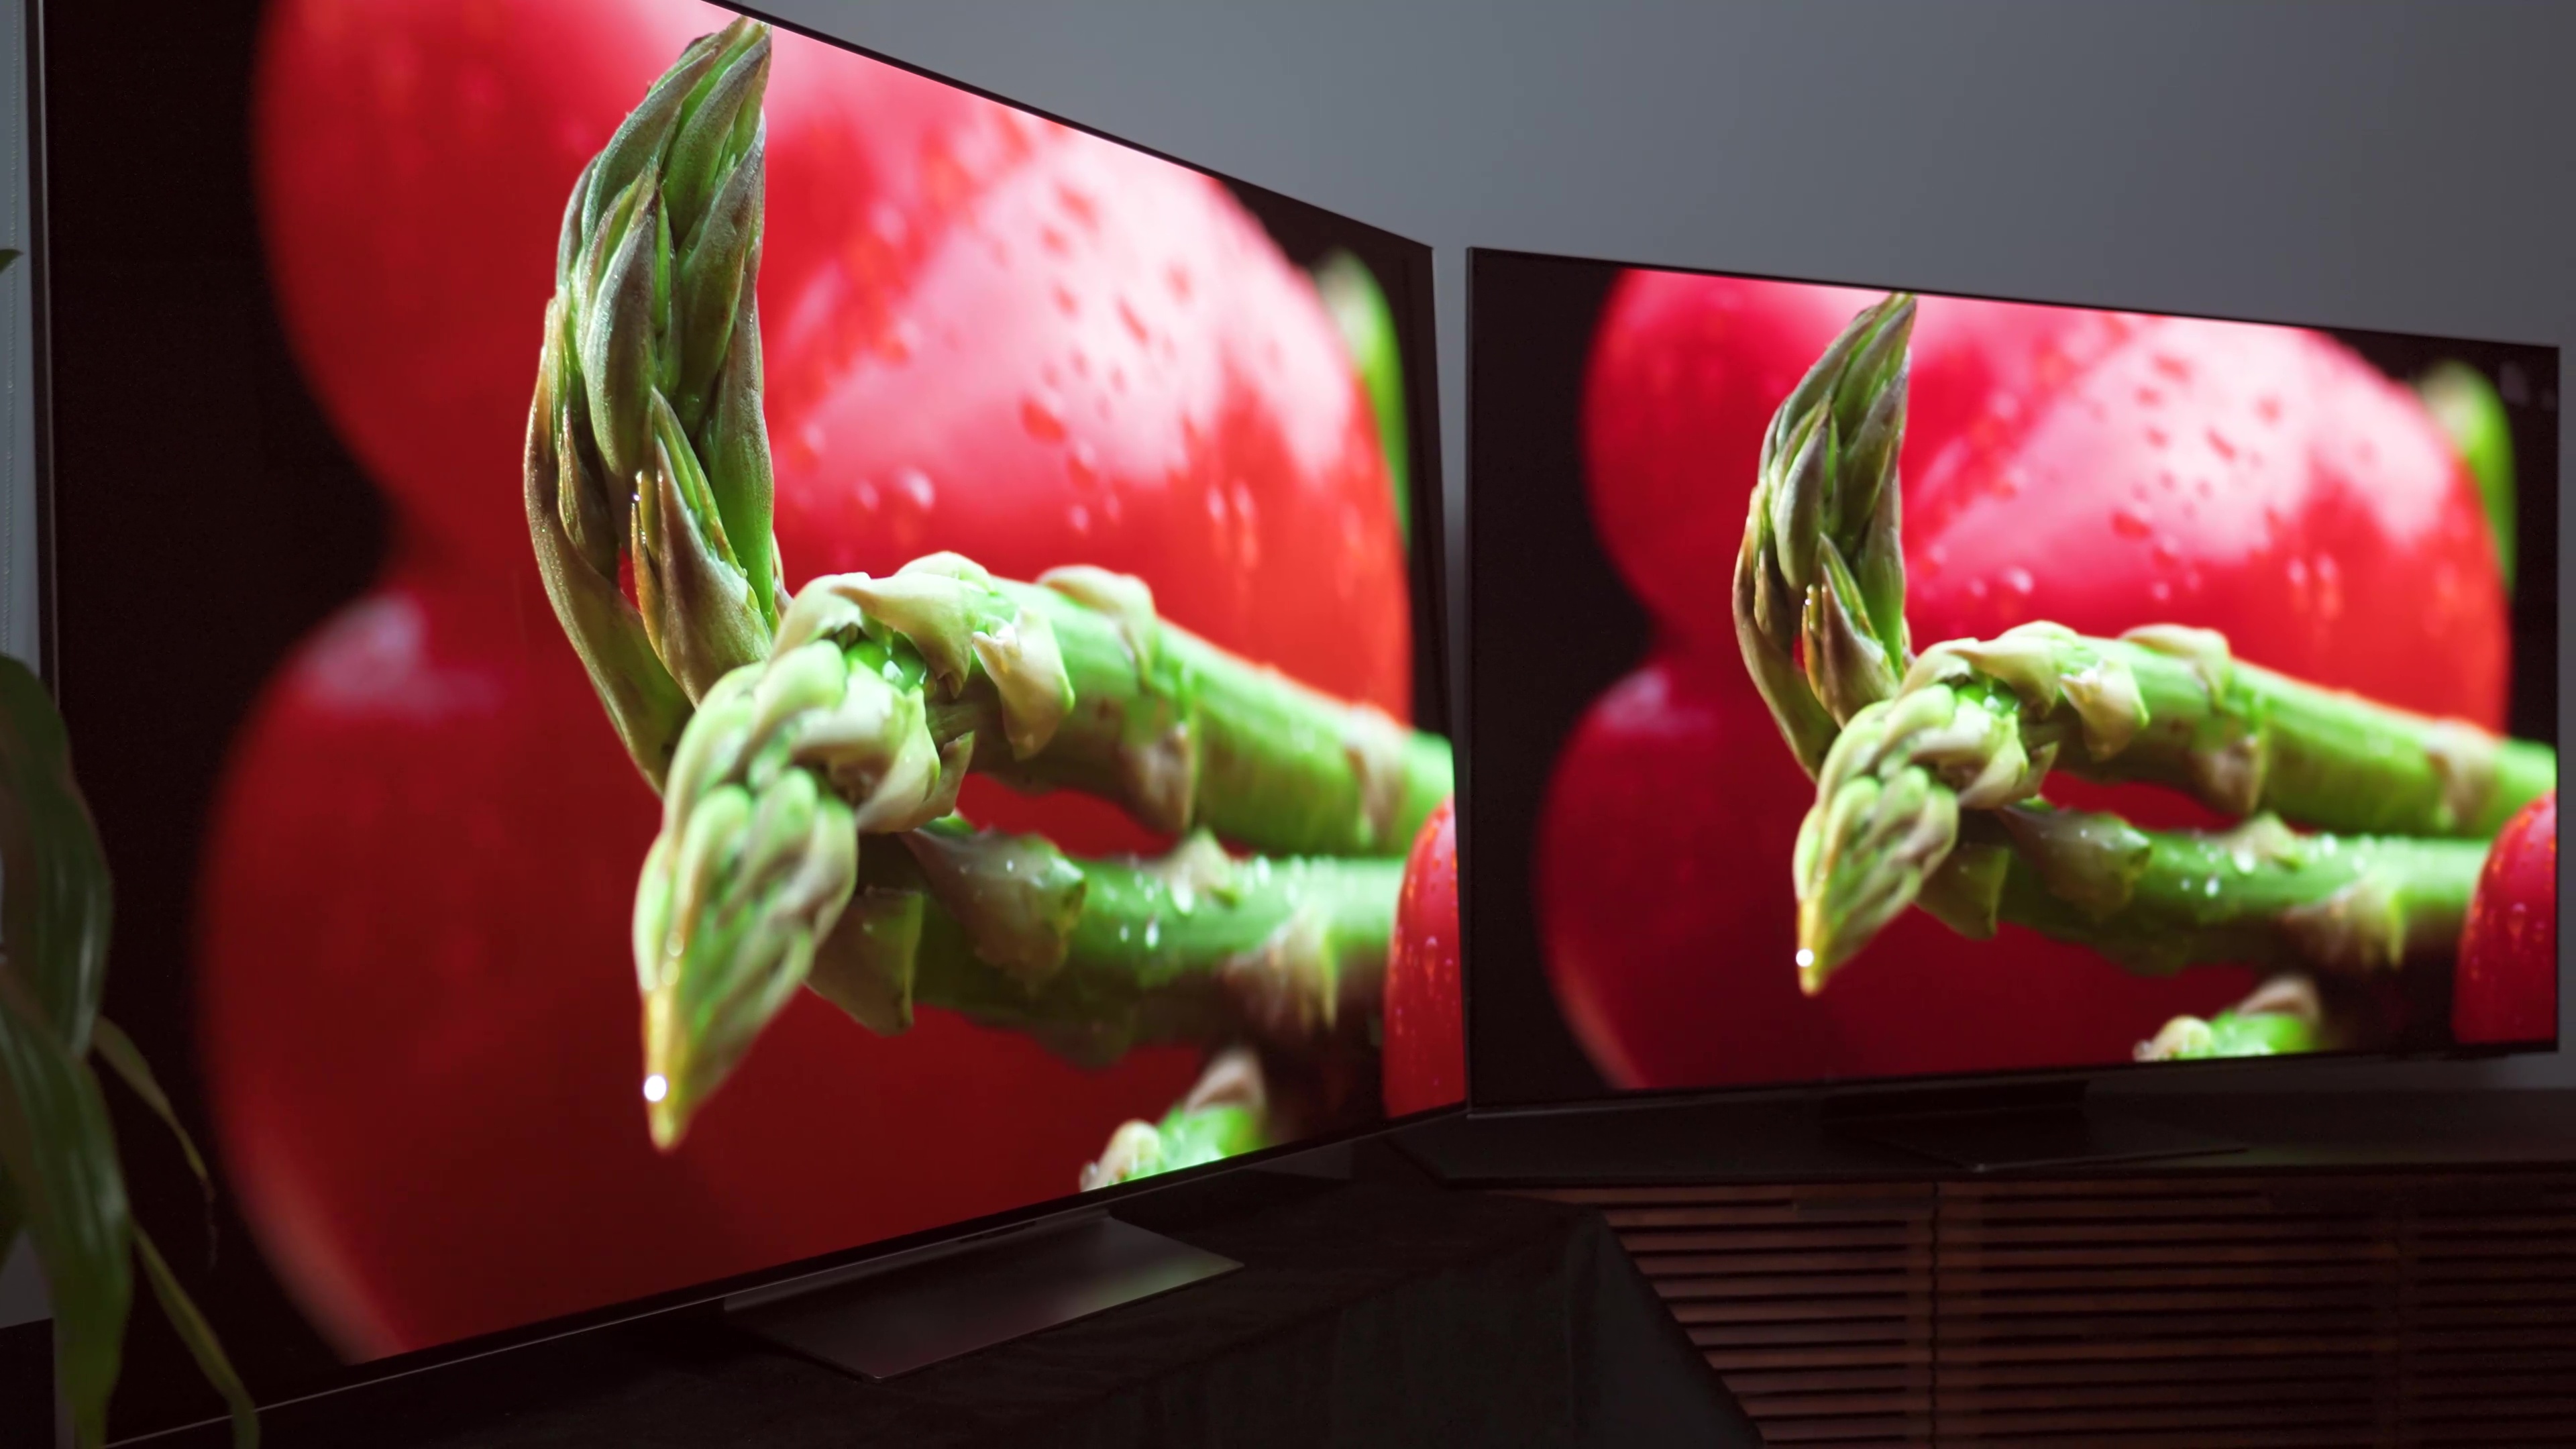 I watched the LG G3 and C3 OLED TV side-by-side — here's the